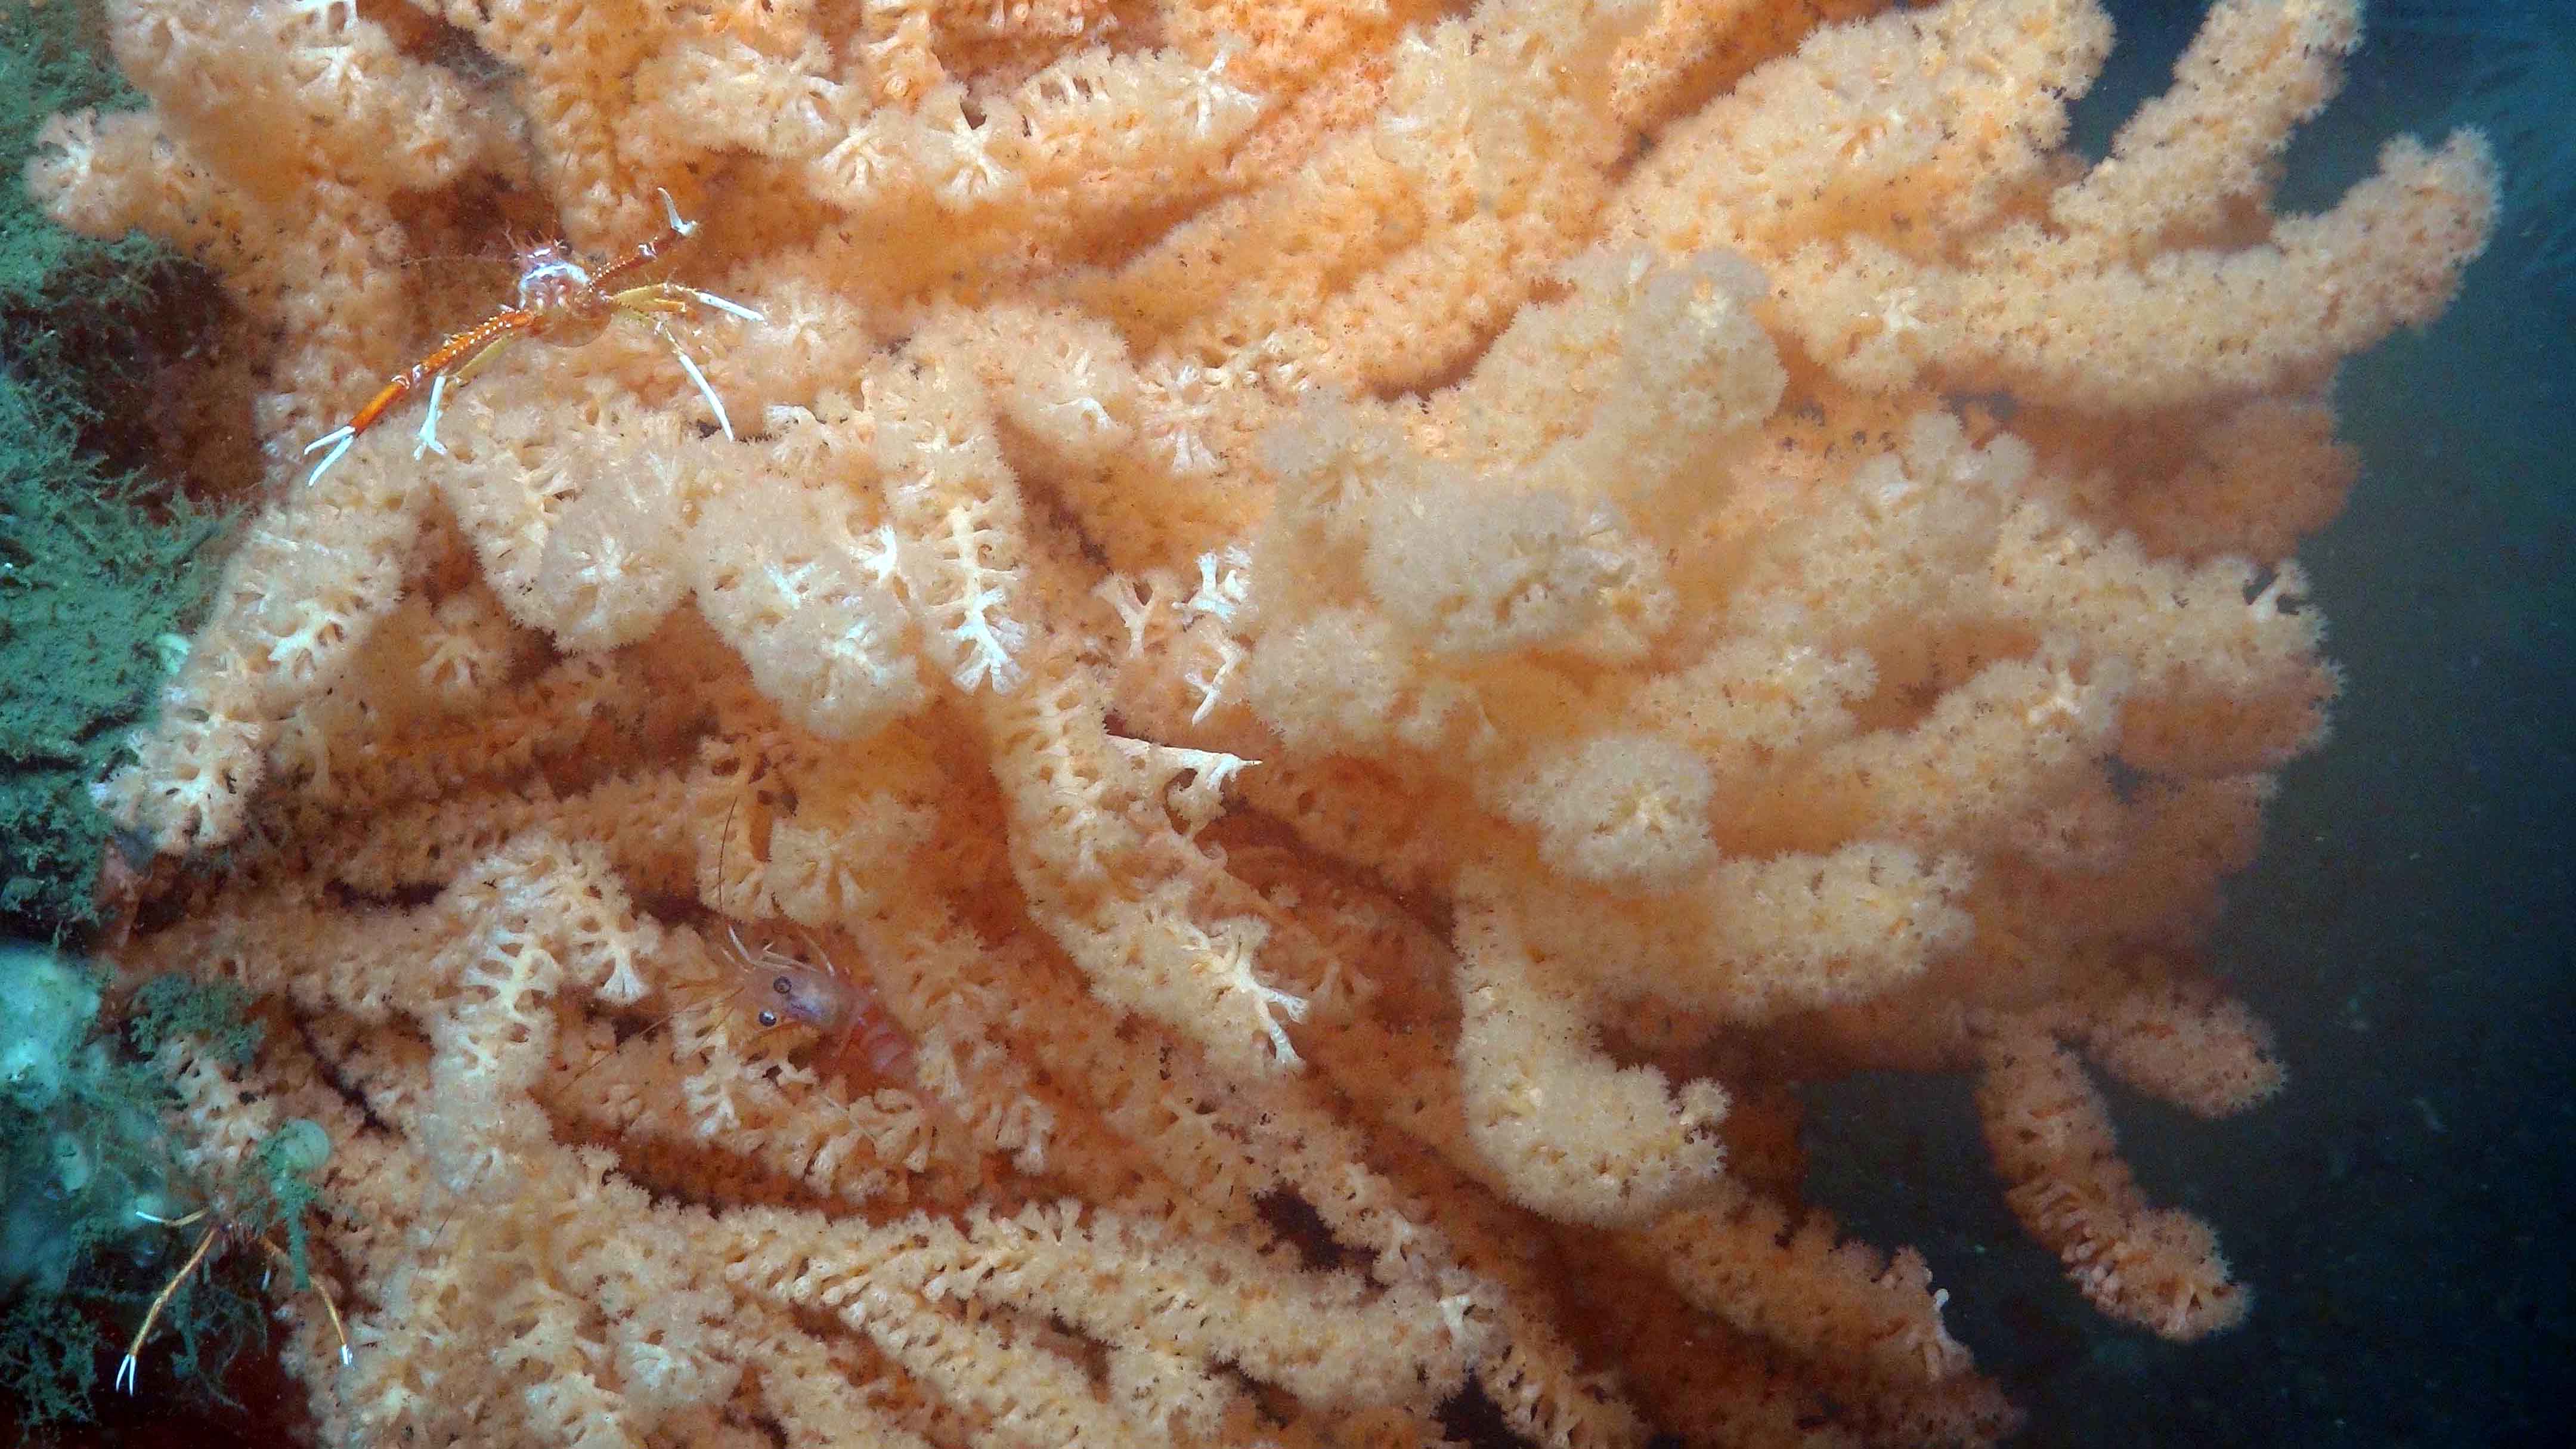 Sometimes called sea fans, Primnoa corals can live hundreds of years. This specimen was found in Norfolk Canyon, off the Virginia coast. 